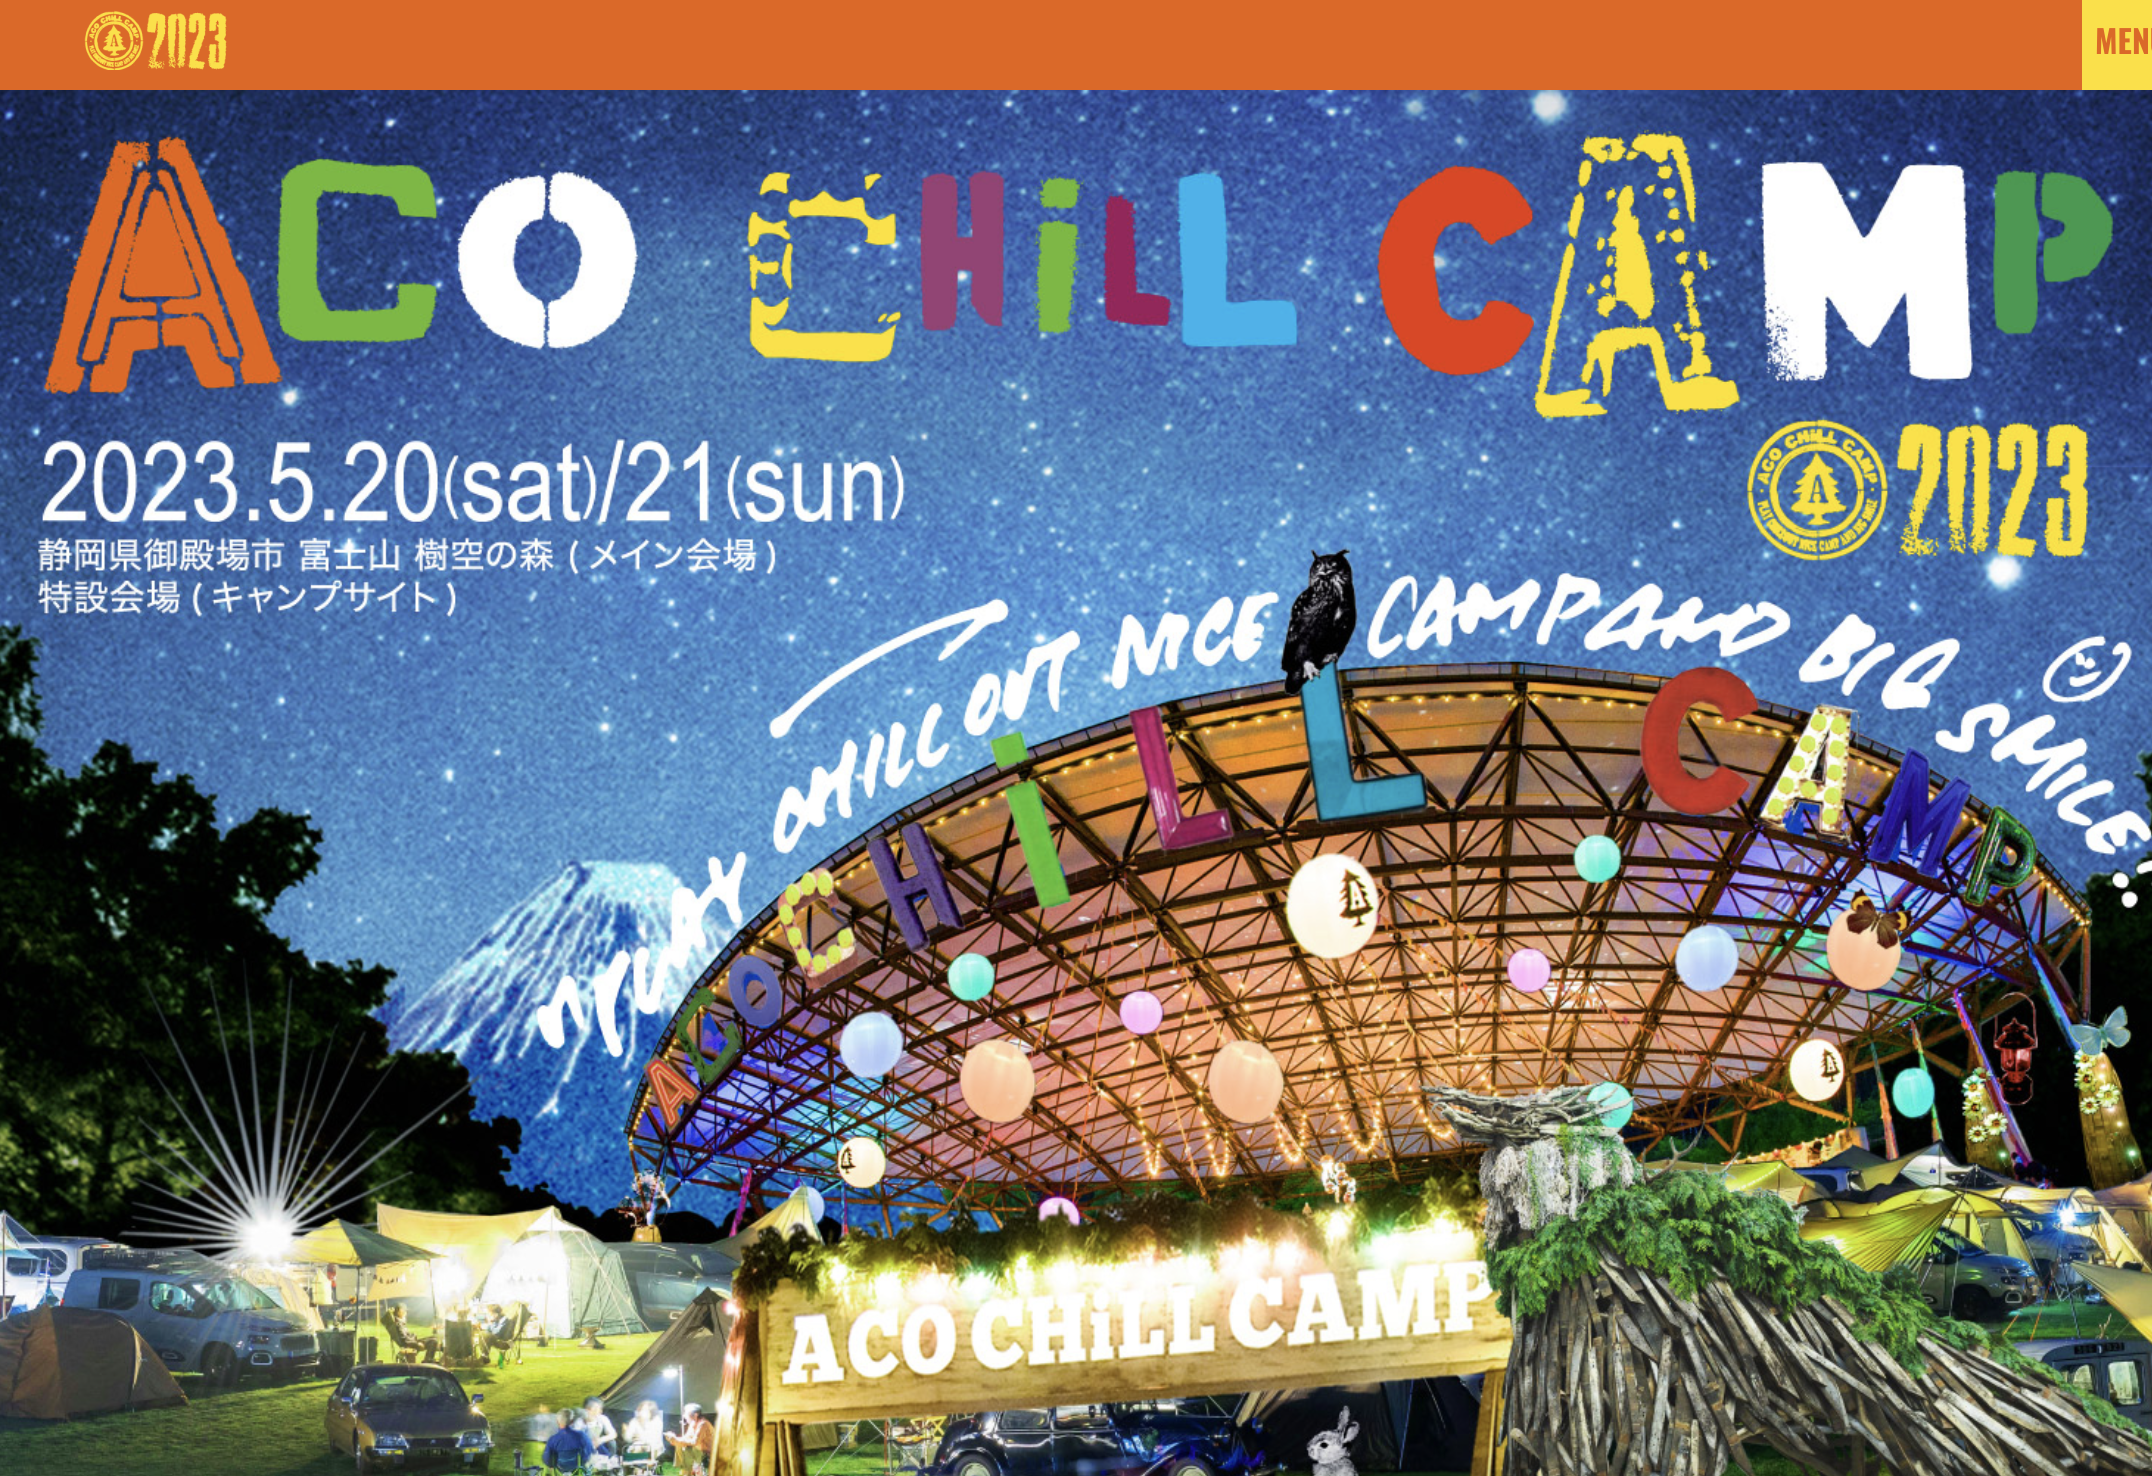 ACO CHiLL CAMP2020 / ORGANISE